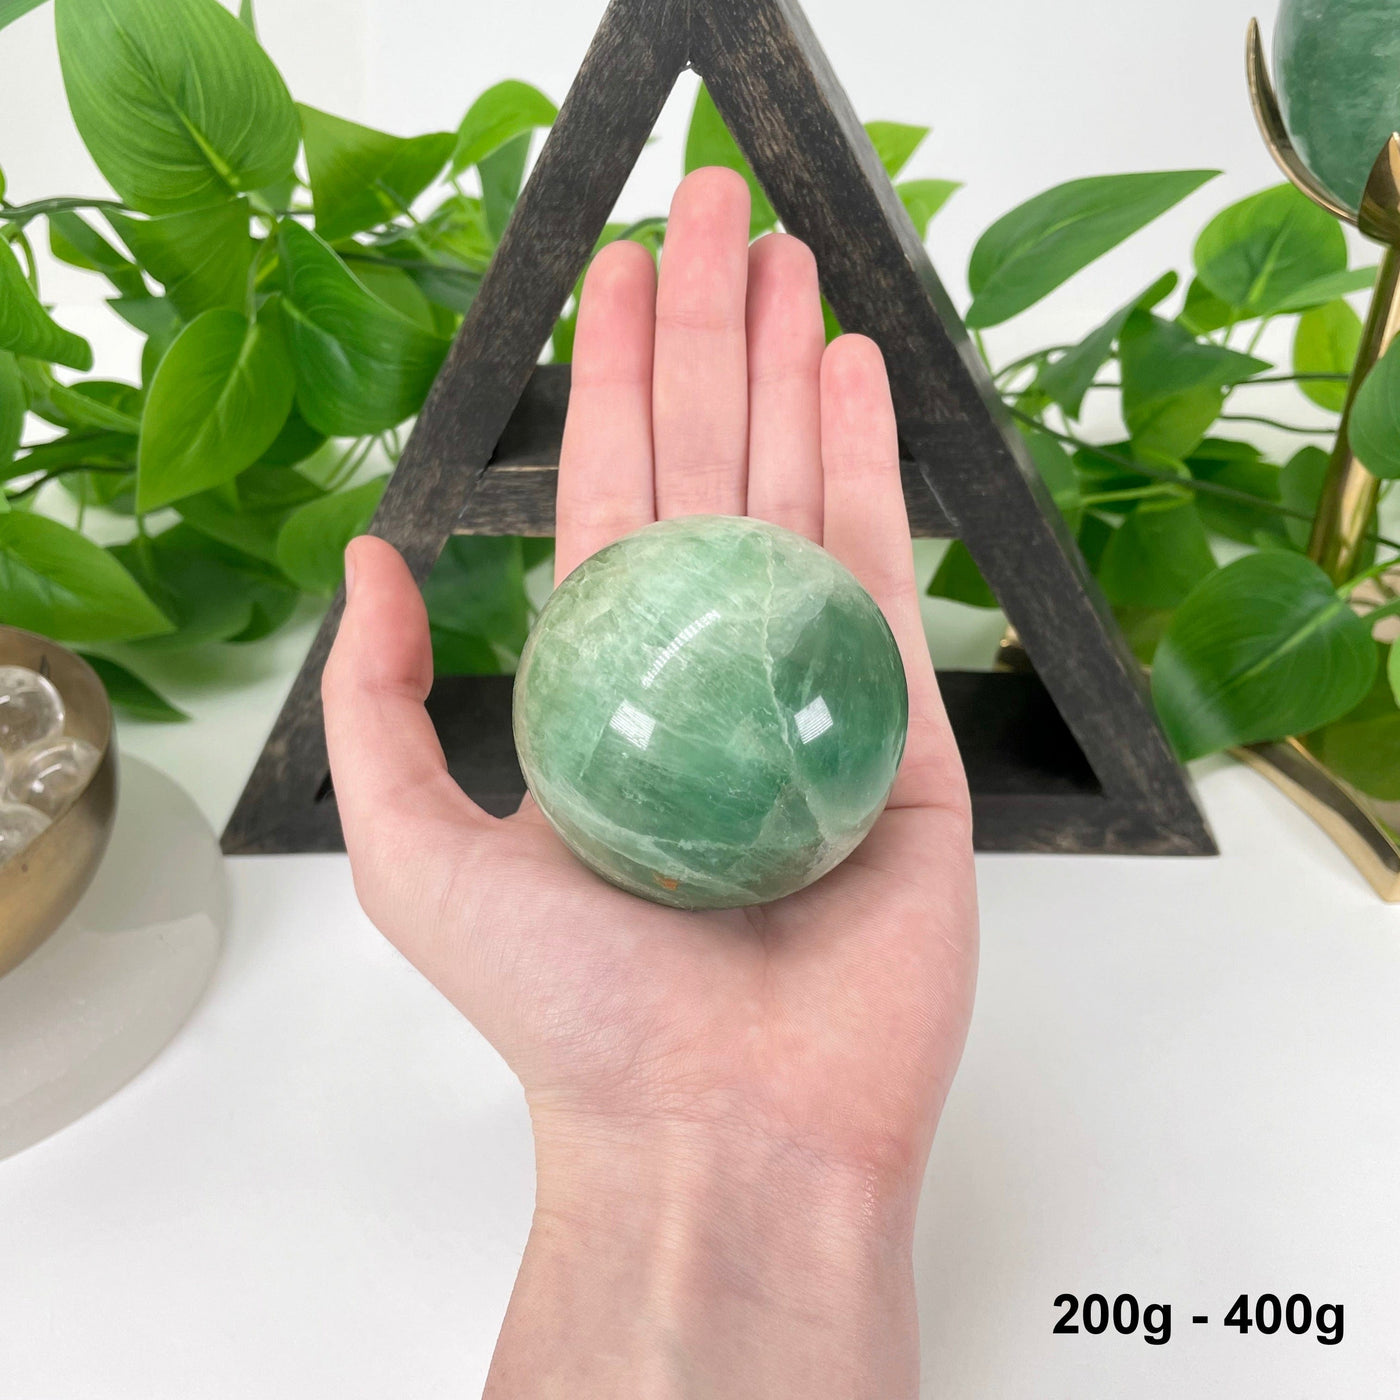 one 200g - 400g green fluorite sphere in hand for size reference